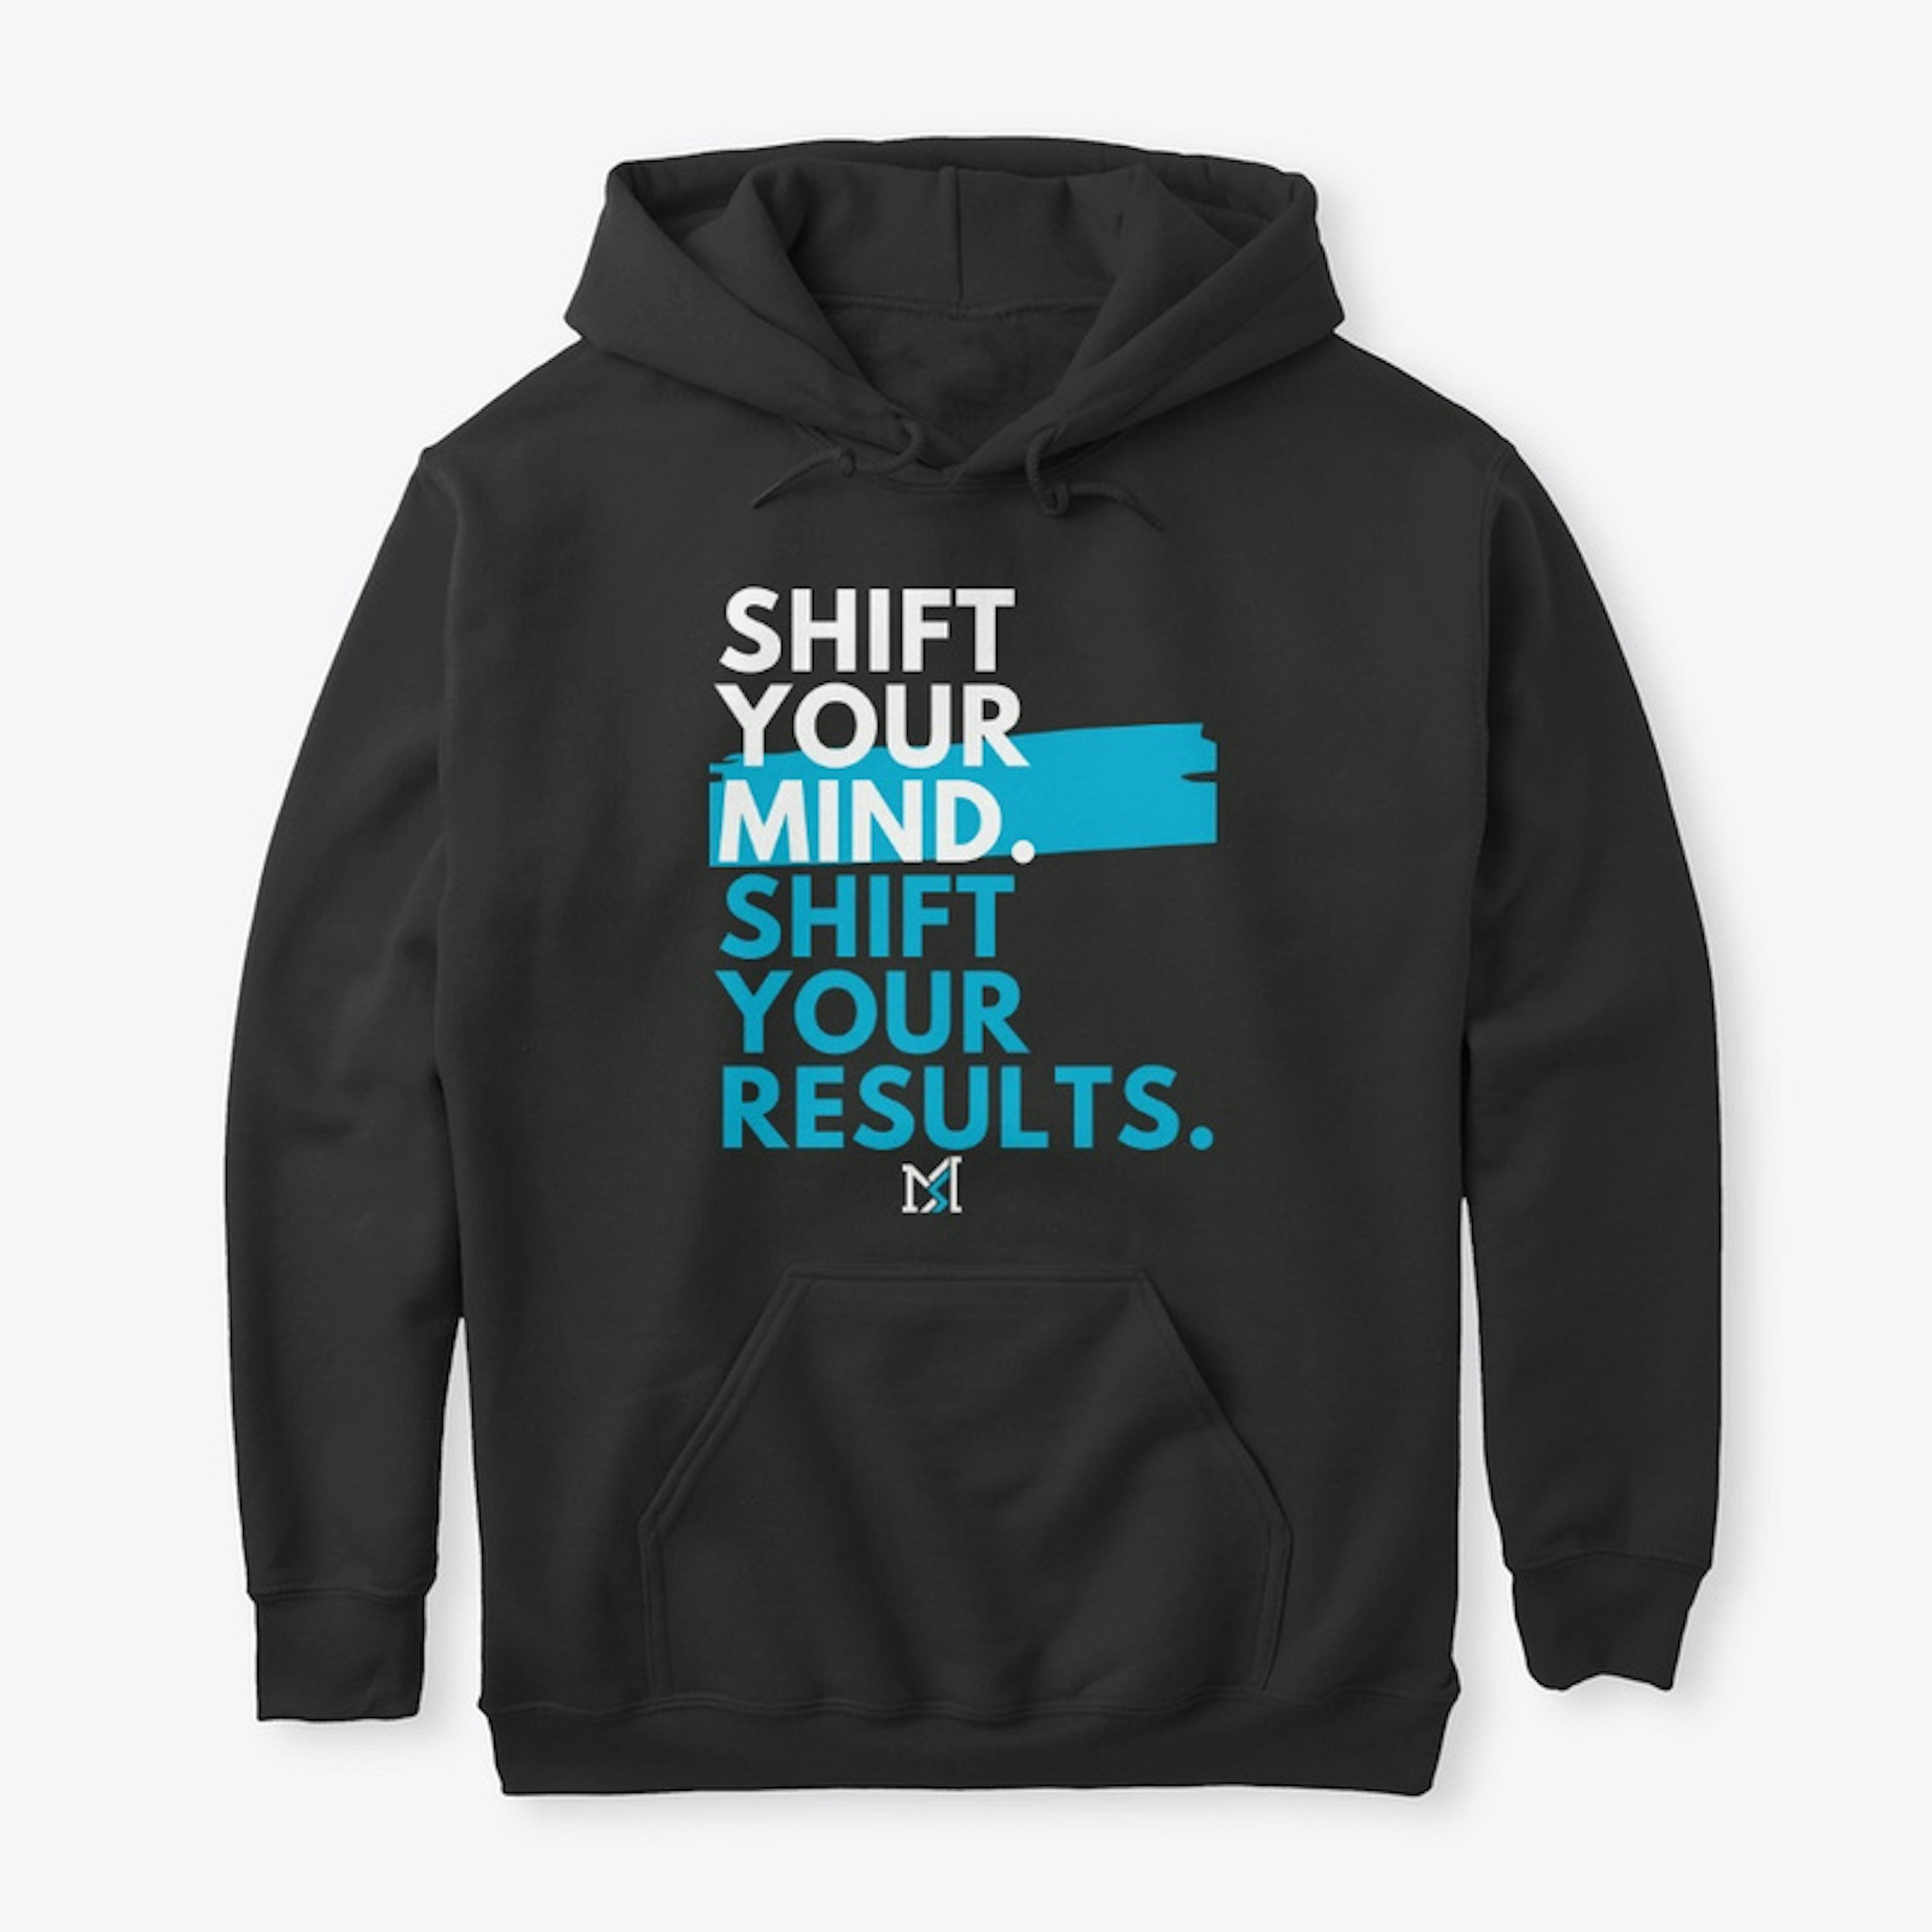 Shift your mind- Black Hoodie